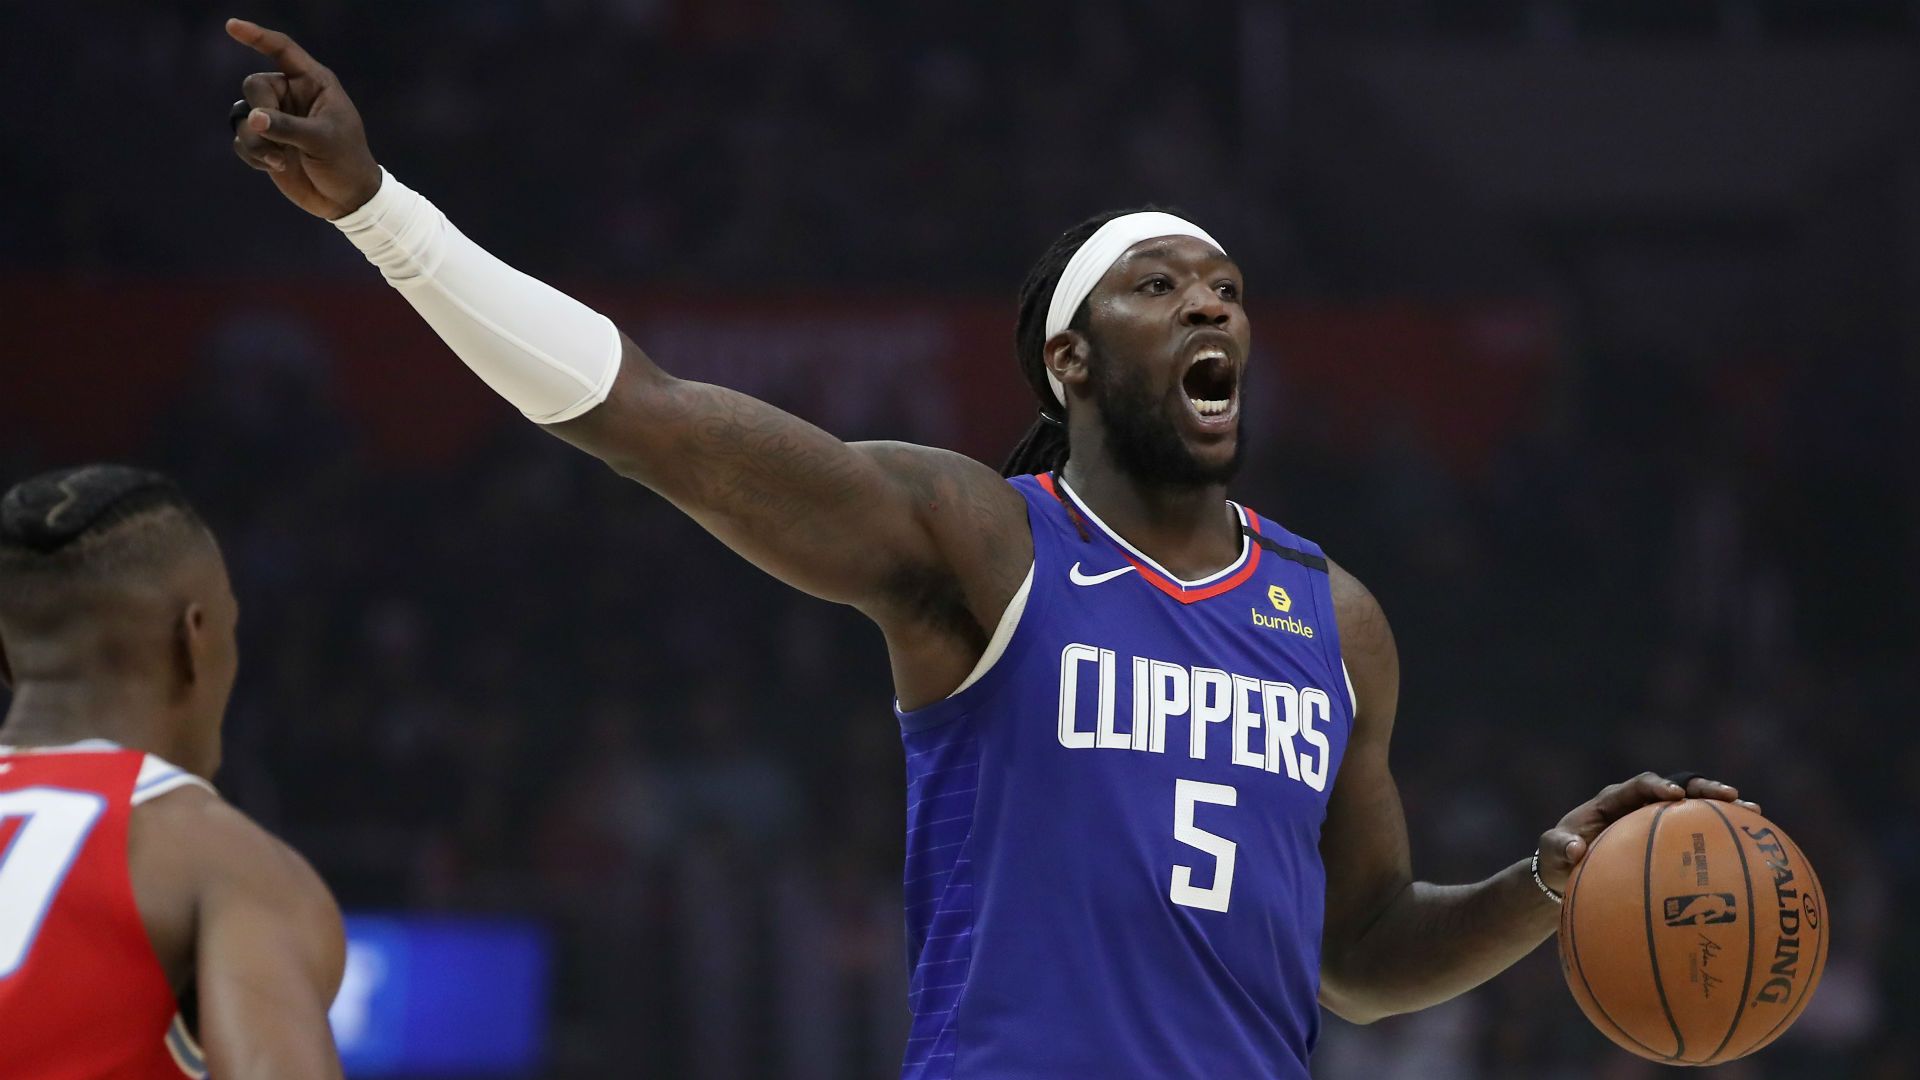 Four stats to know about LA Clippers centre Montrezl Harrell ahead of free agency. NBA.com Australia. The official site of